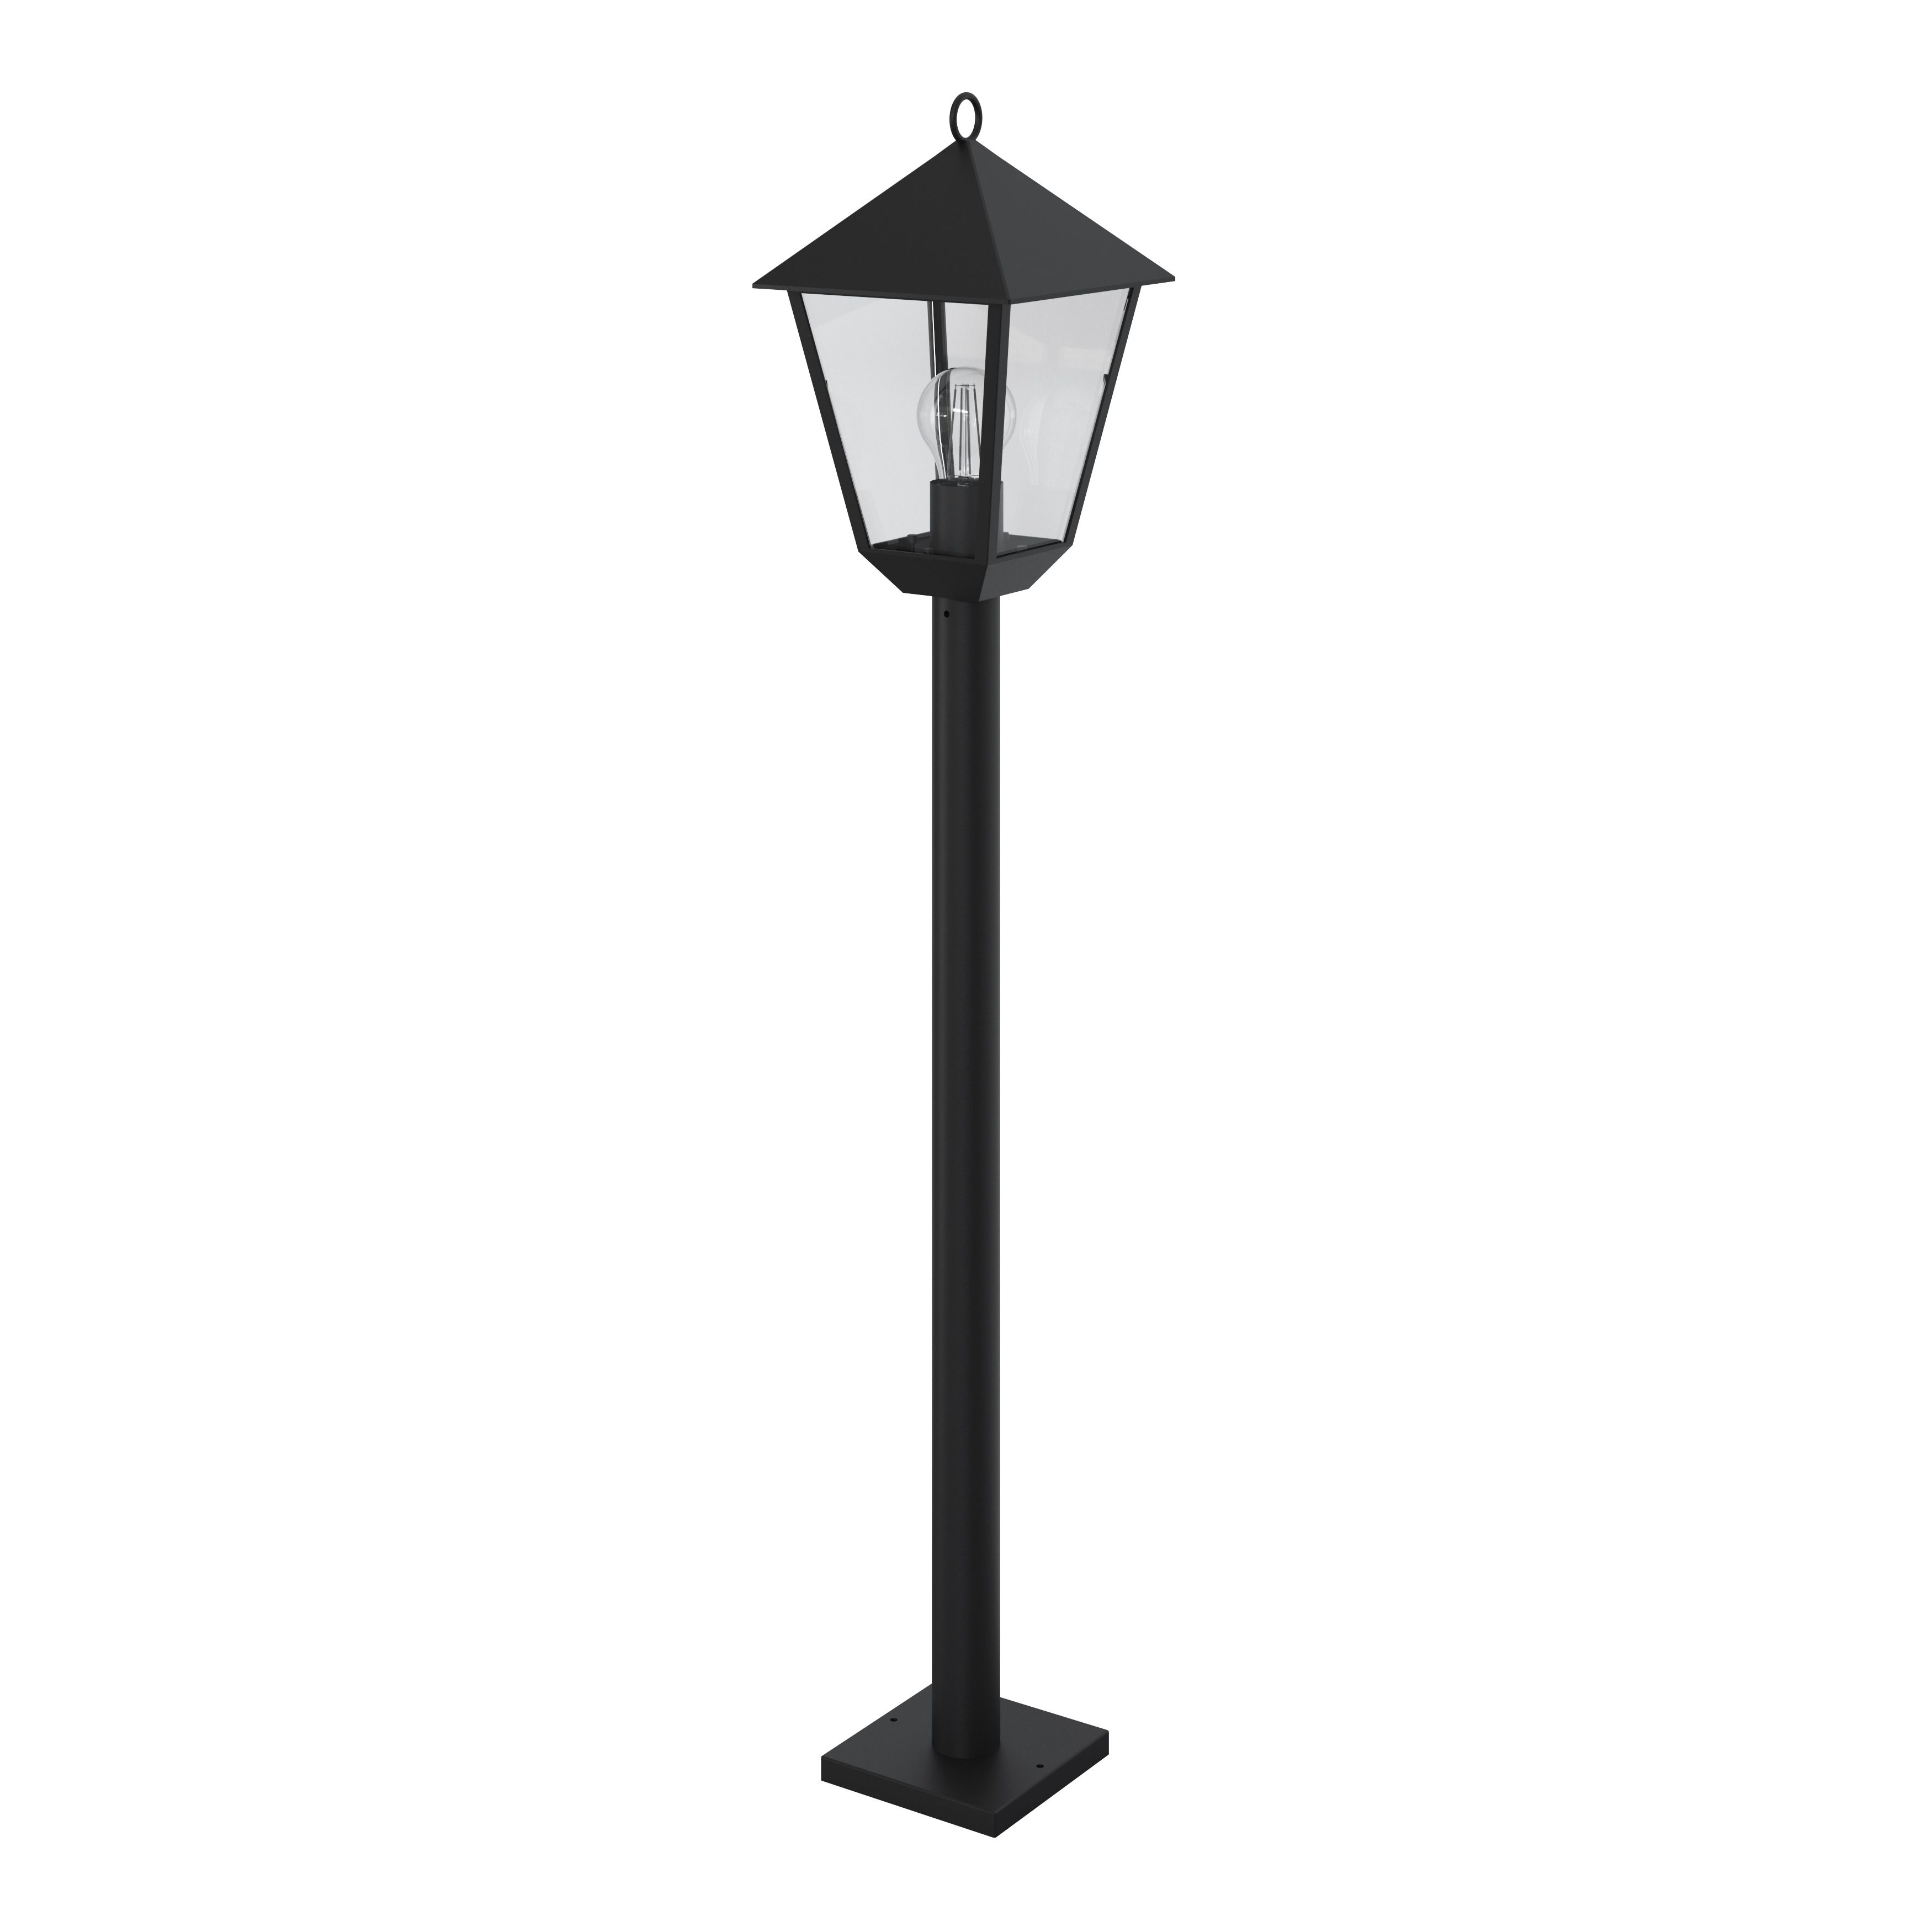 GoodHome Lantern Black Mains-powered 1 lamp Outdoor 4 faces Post light (H)1100mm